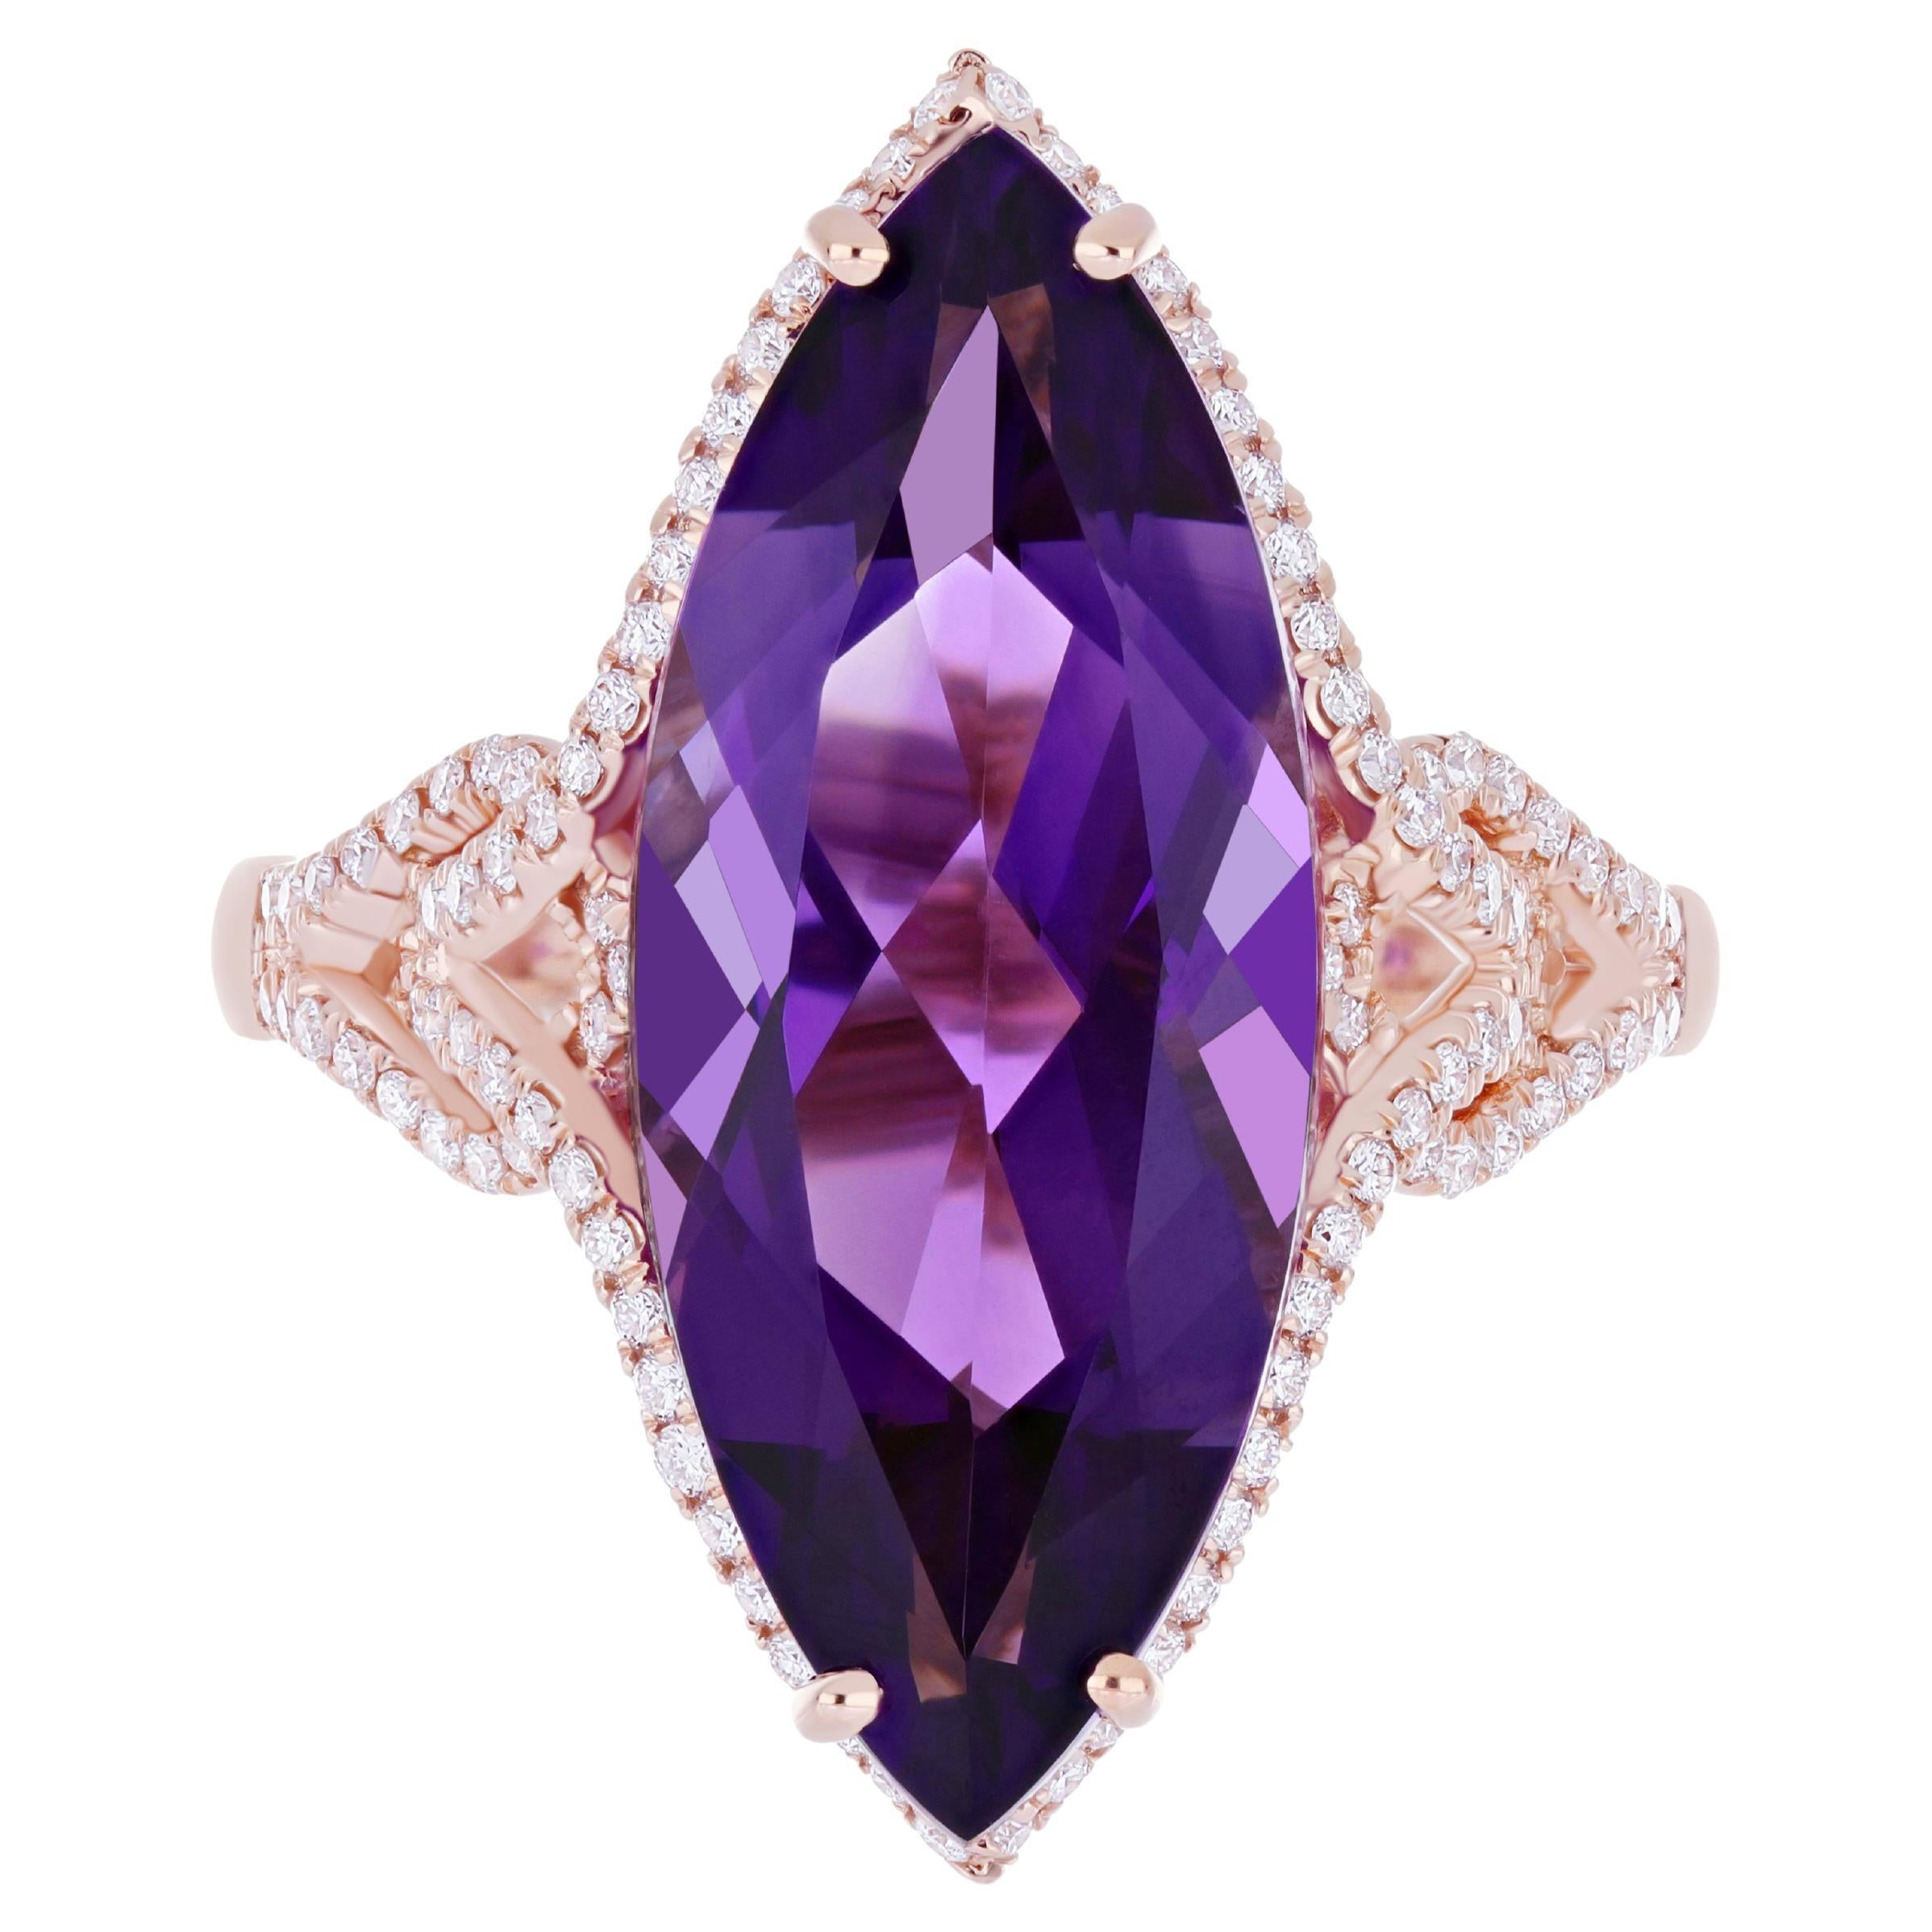 For Sale:  9.85cts Amethyst and Diamond Ring in 14karat Rose Gold Cocktail Ring for Wedding